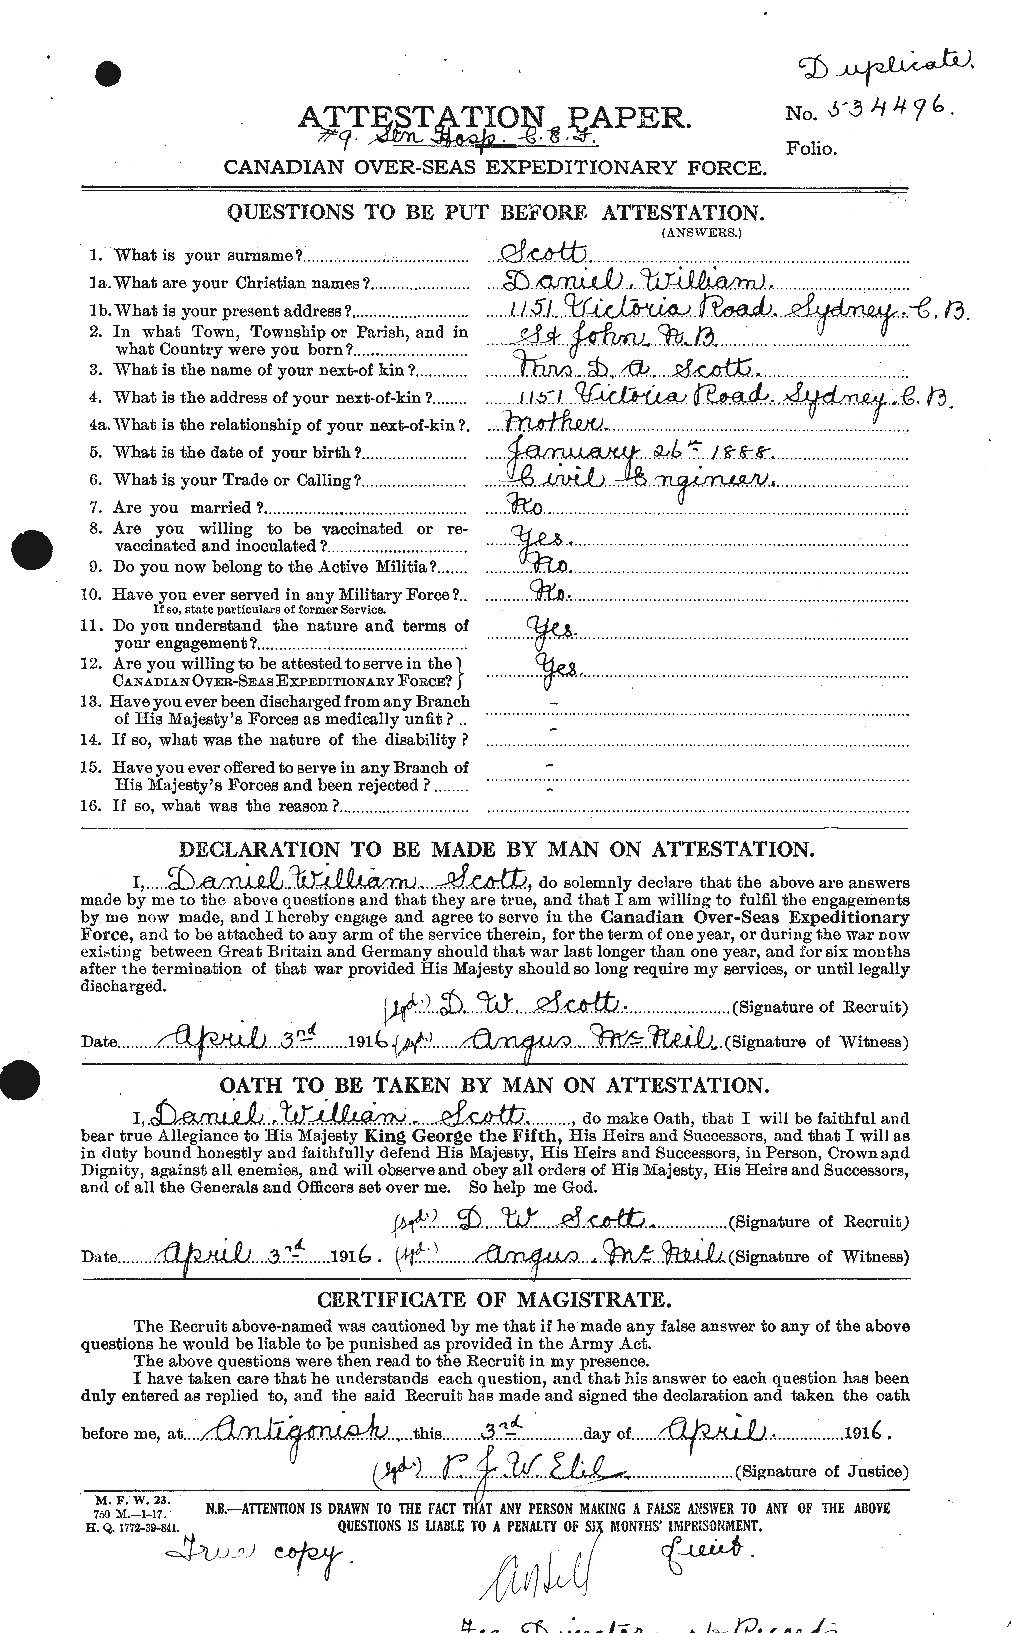 Personnel Records of the First World War - CEF 085612a